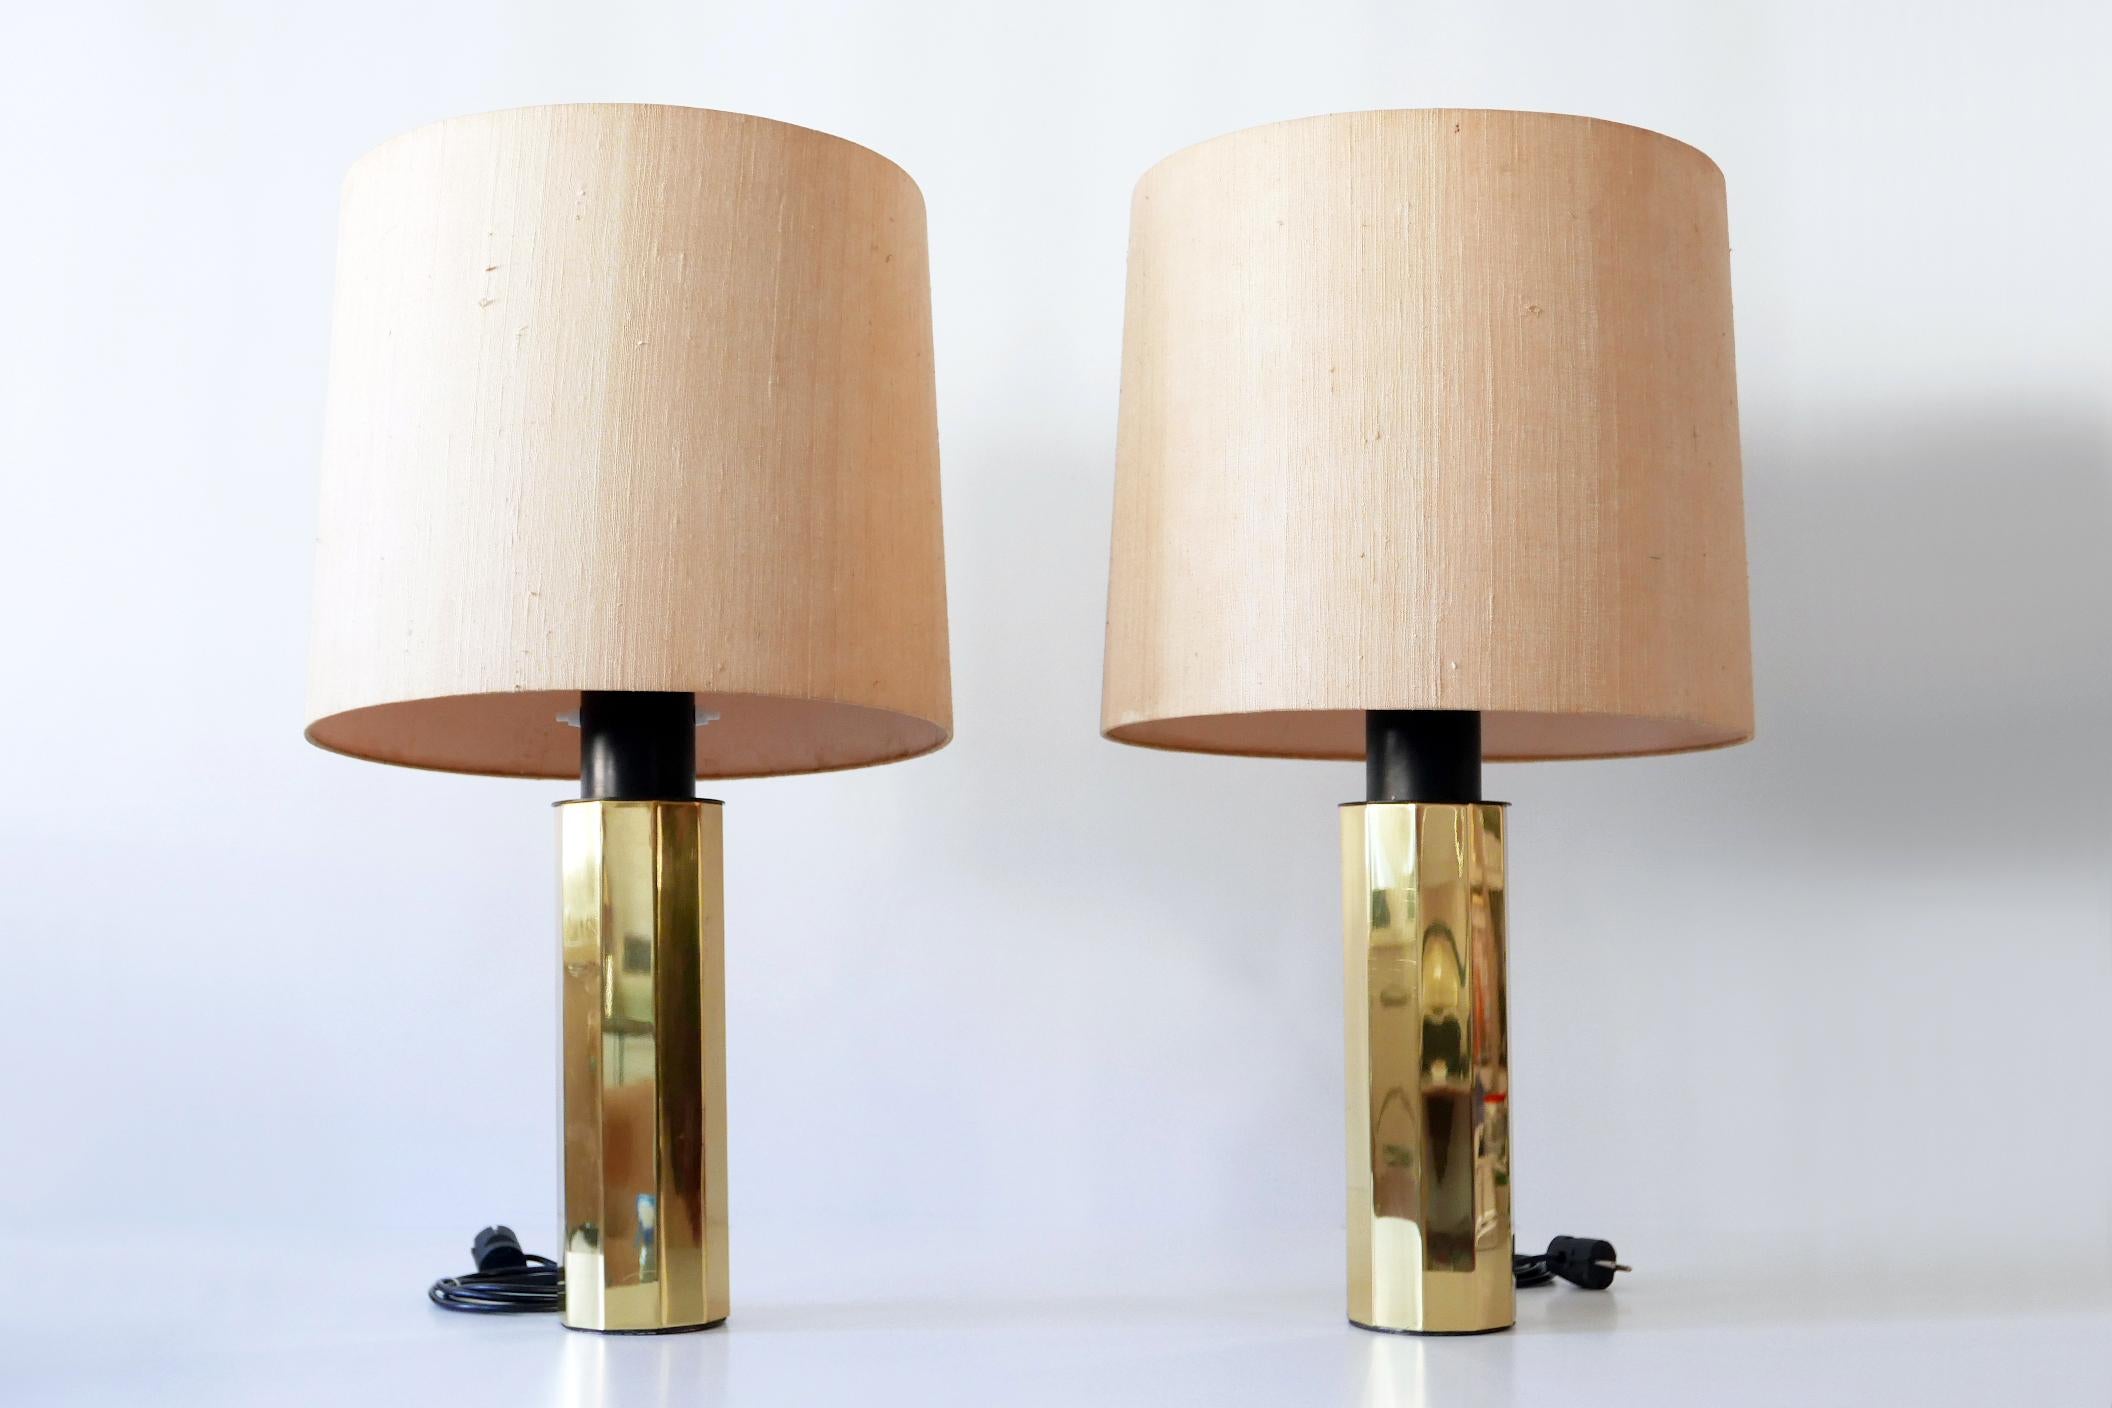 Set of Two Huge, 5-Flamed Midcentury Decagonal Brass Table Lamps, 1960s, Germany In Good Condition For Sale In Munich, DE